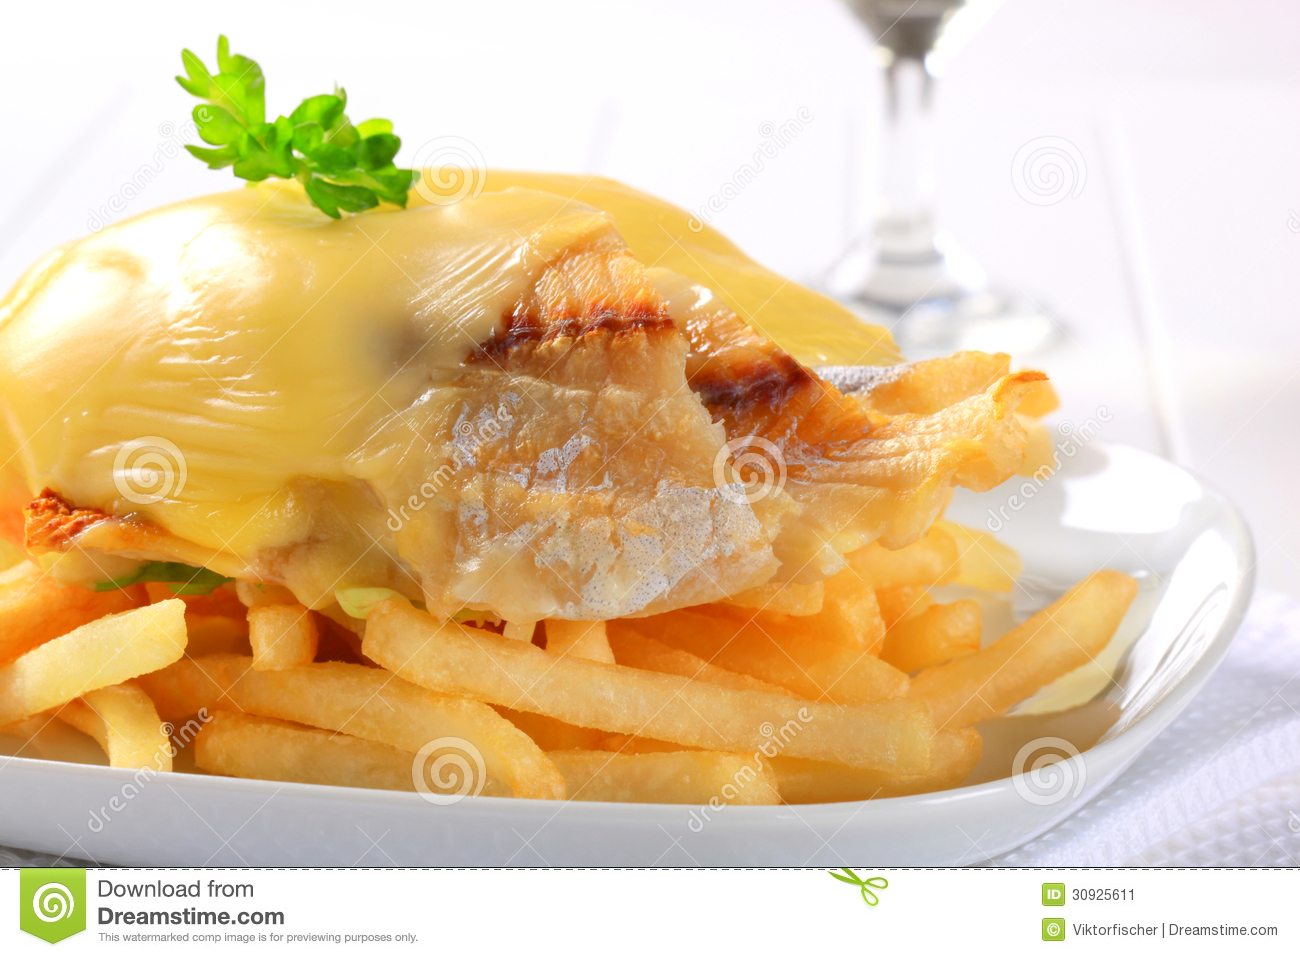 Cheese Topped Fish Fillets With French Fries Stock Image   Image